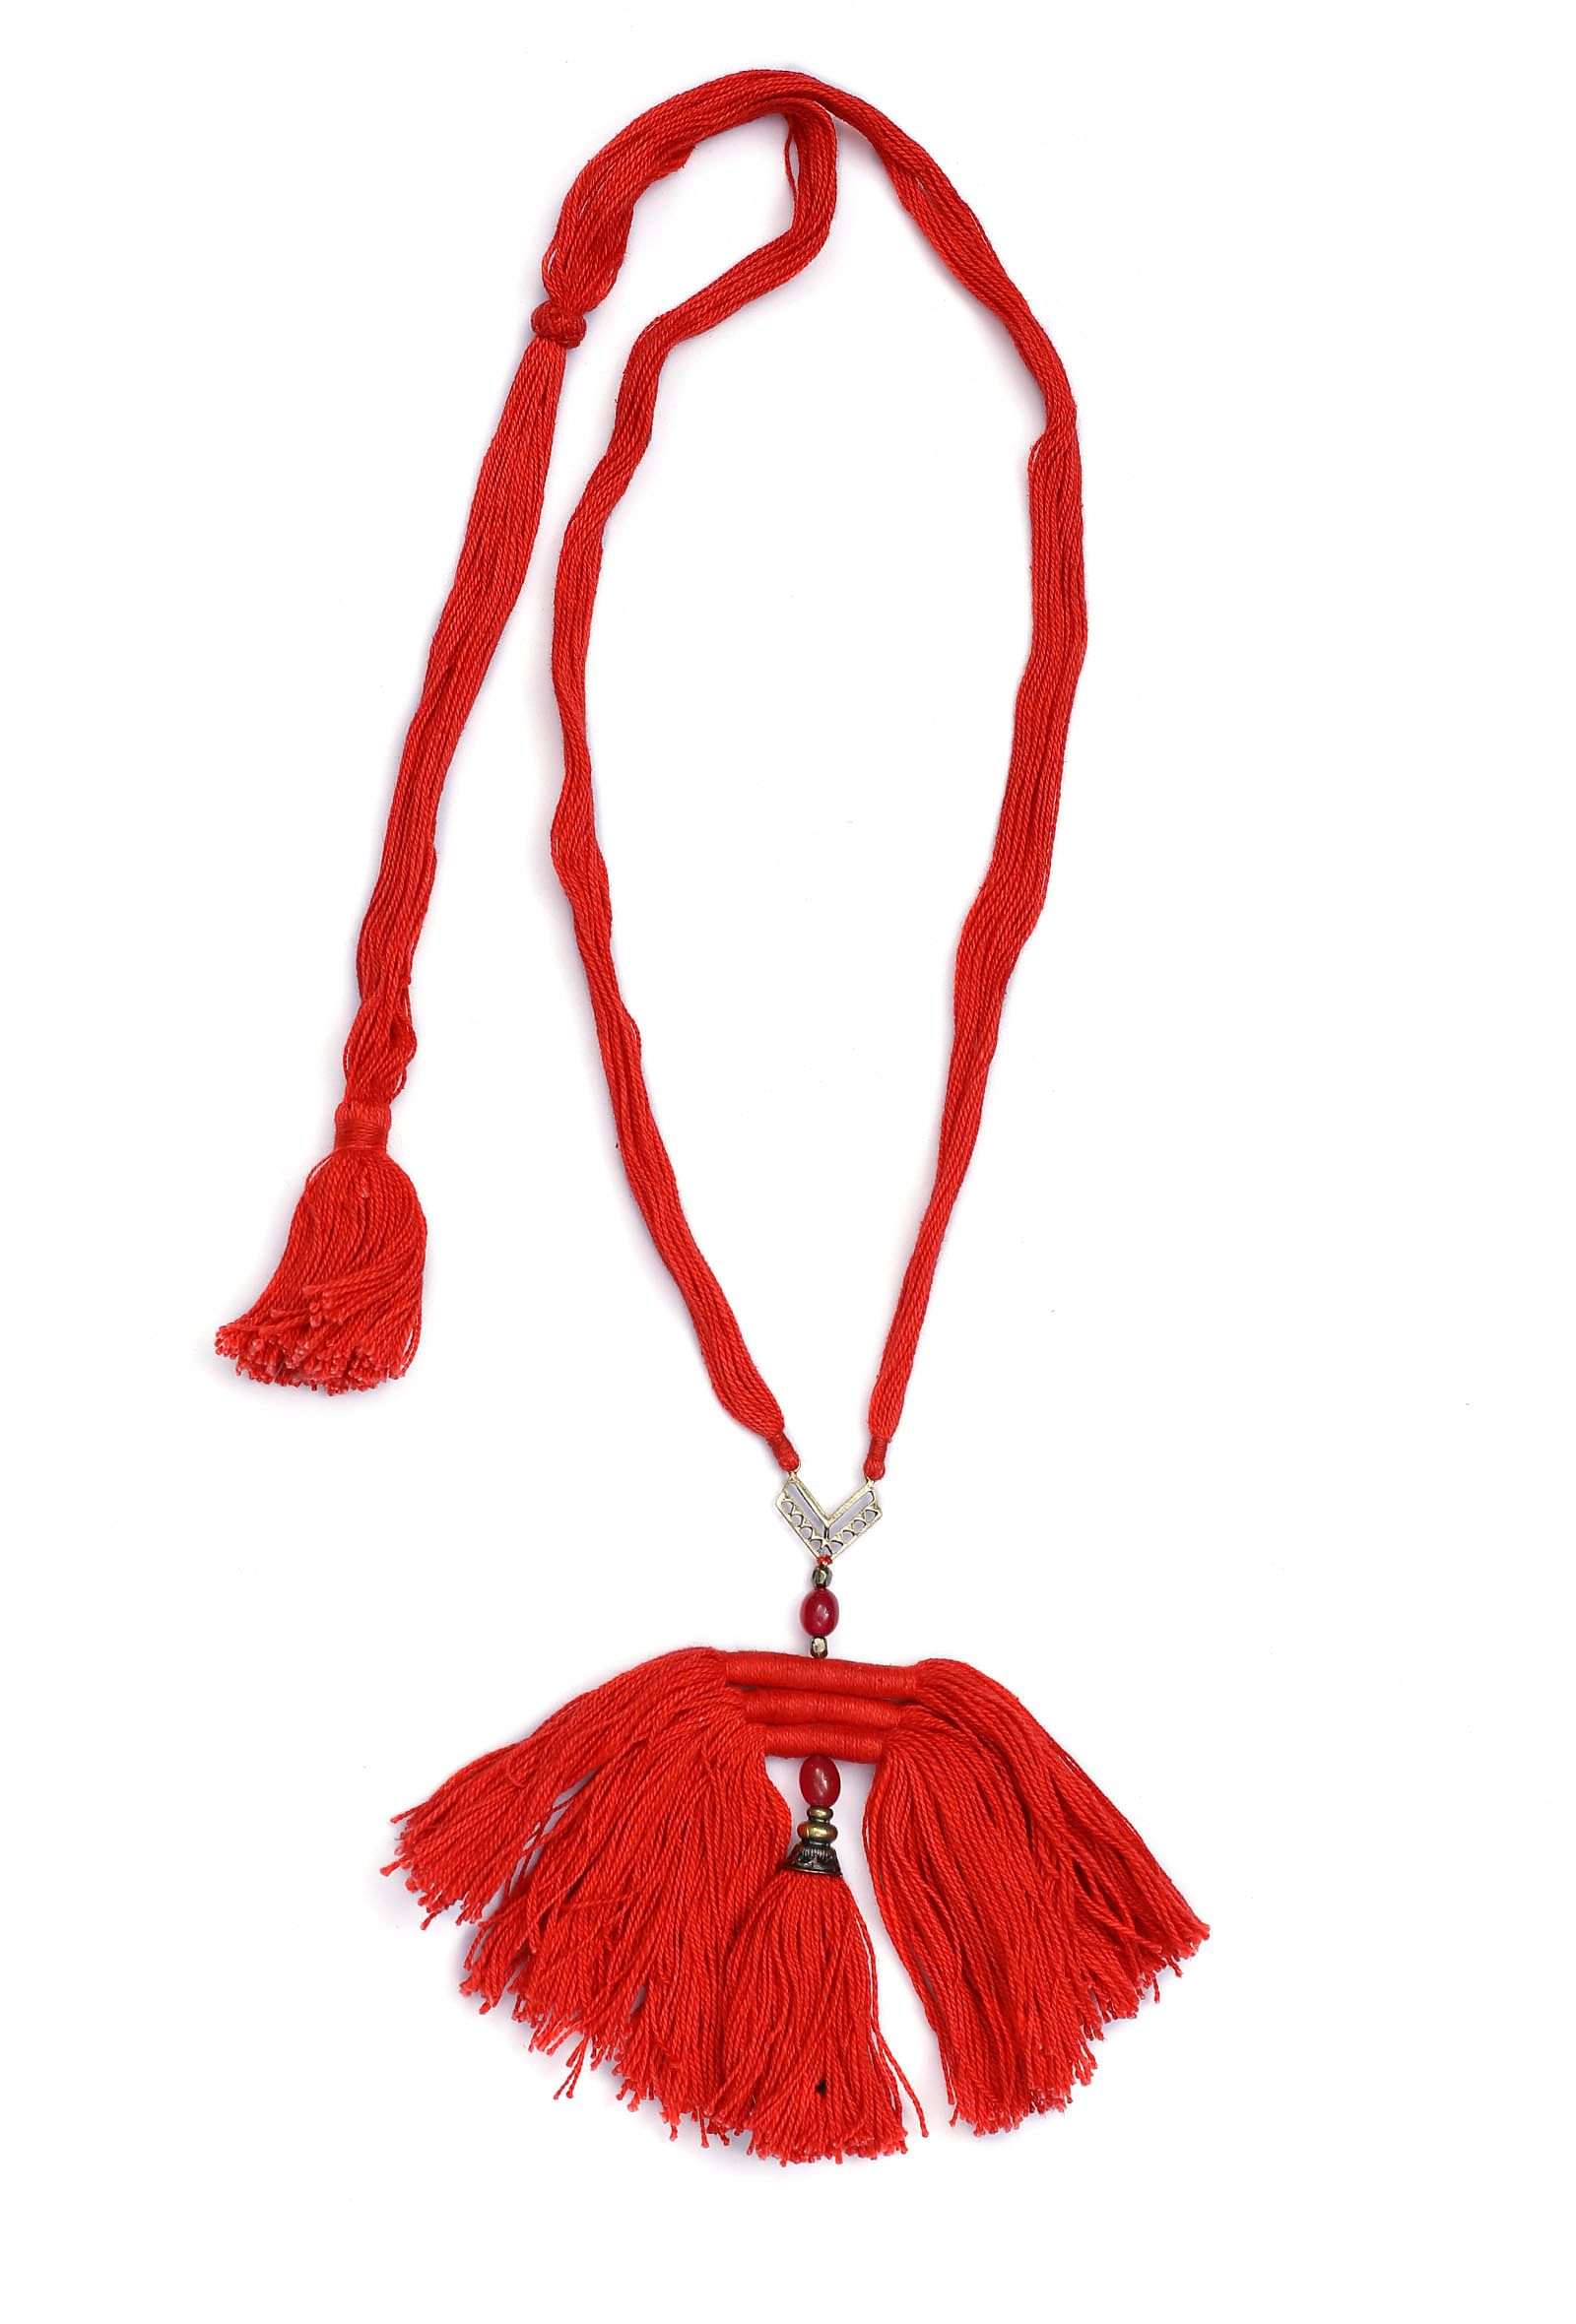 Scarlet Red Thread Silver Tribal Necklace